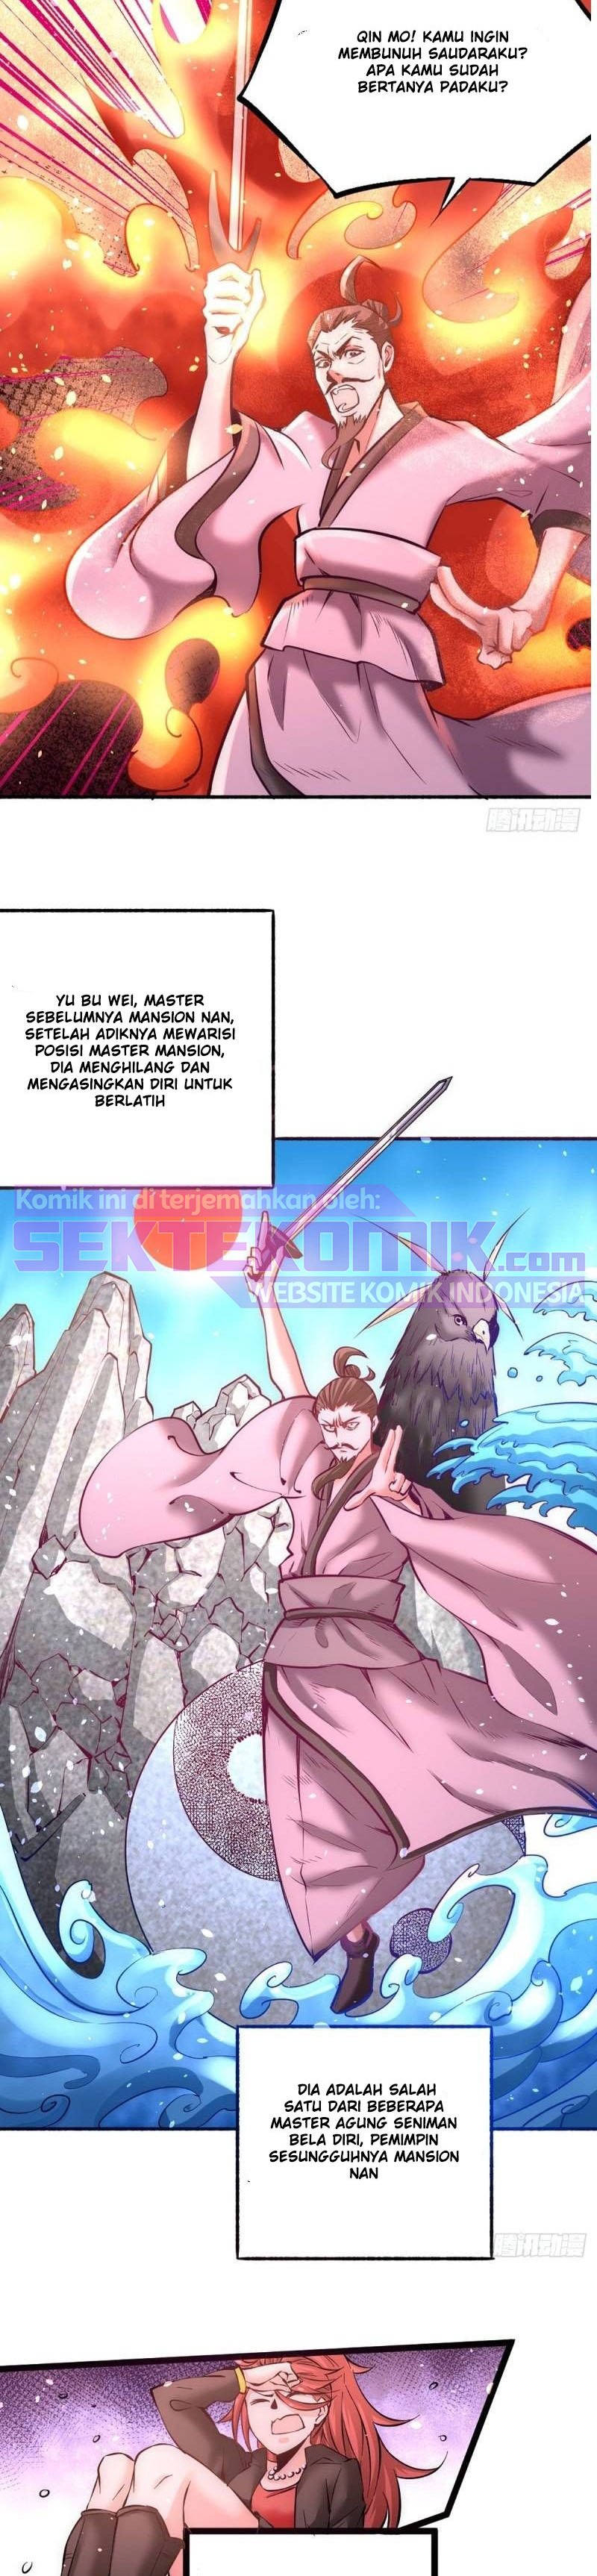 Almighty Master Chapter 98